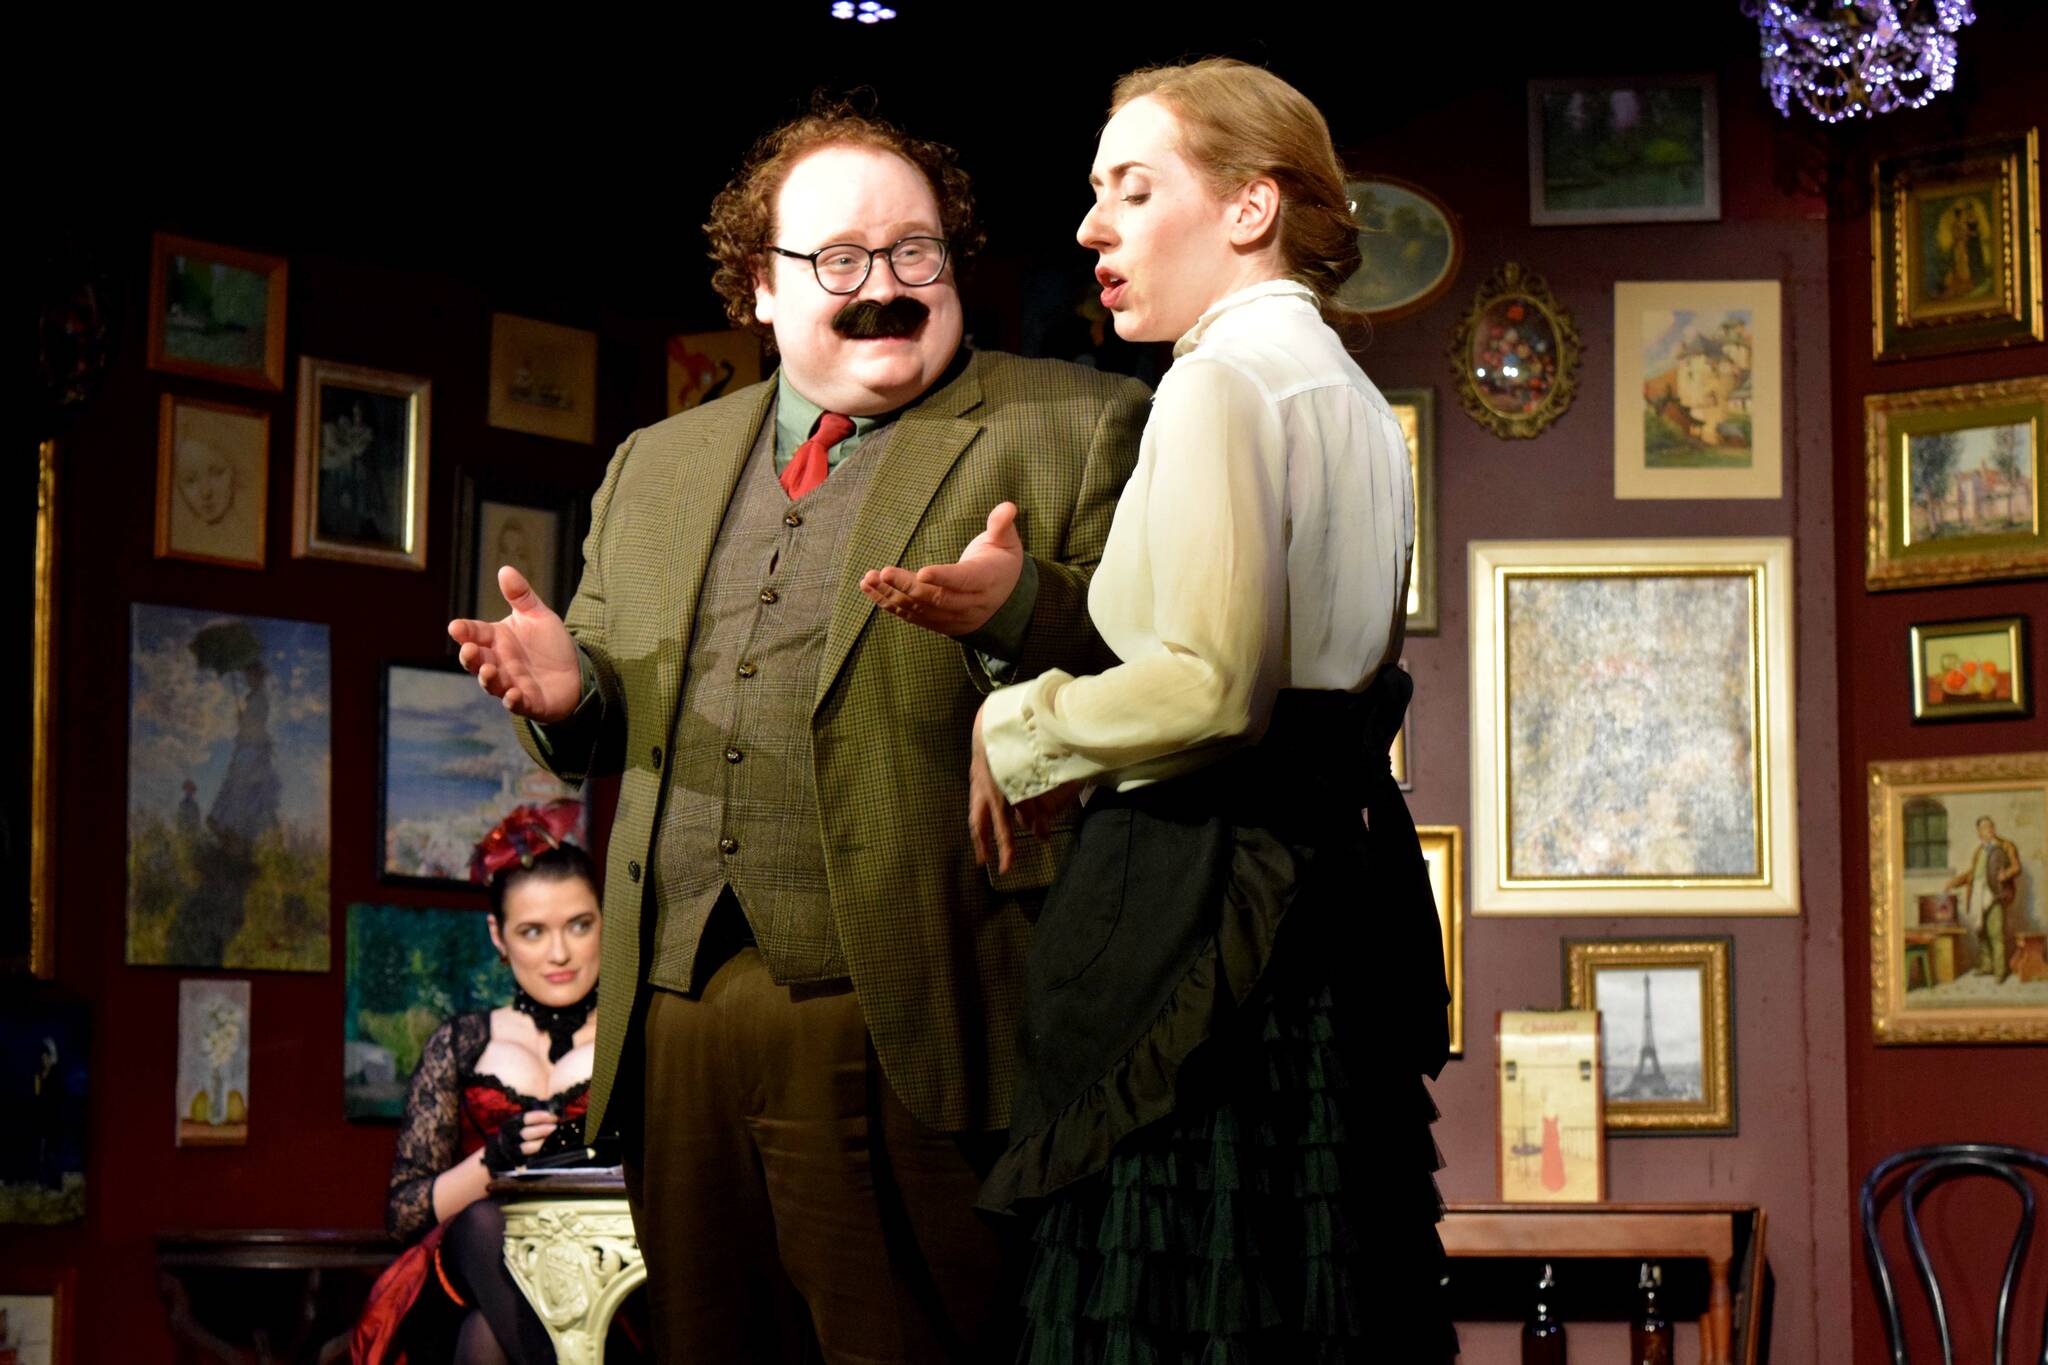 Alex Demana, left, plays Albert Einstein during rehearsal of “Picasso at the Lapin Agile” at Valley Center Stage.